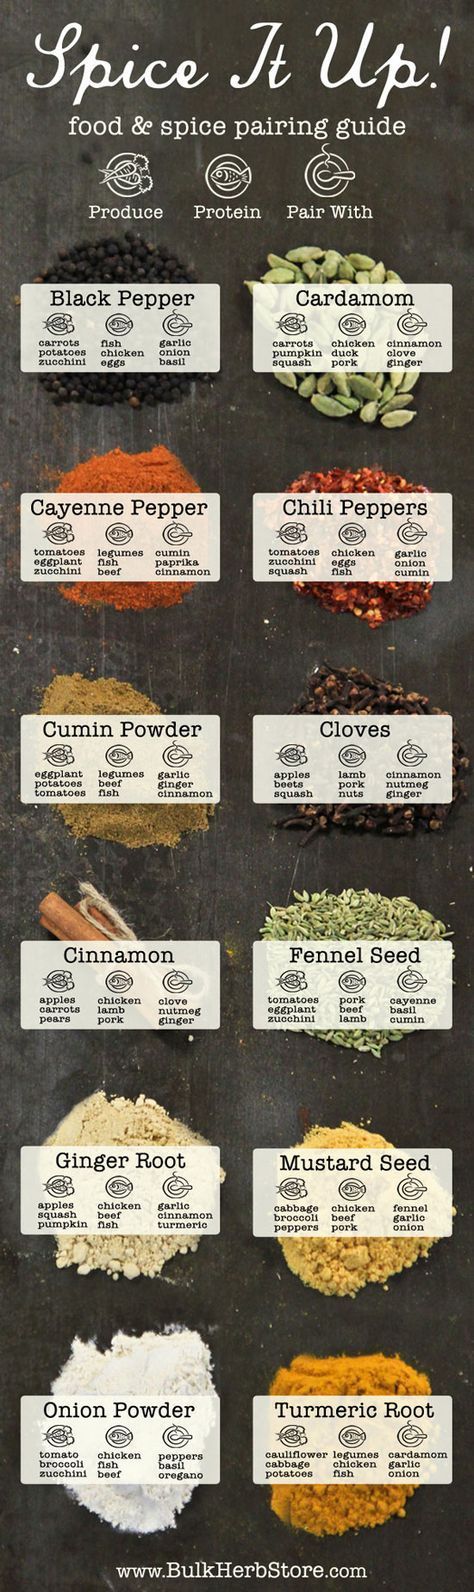 The right use of herbs/spices makes all the difference between cooking for the sake of feeding, and cooking for the sake of